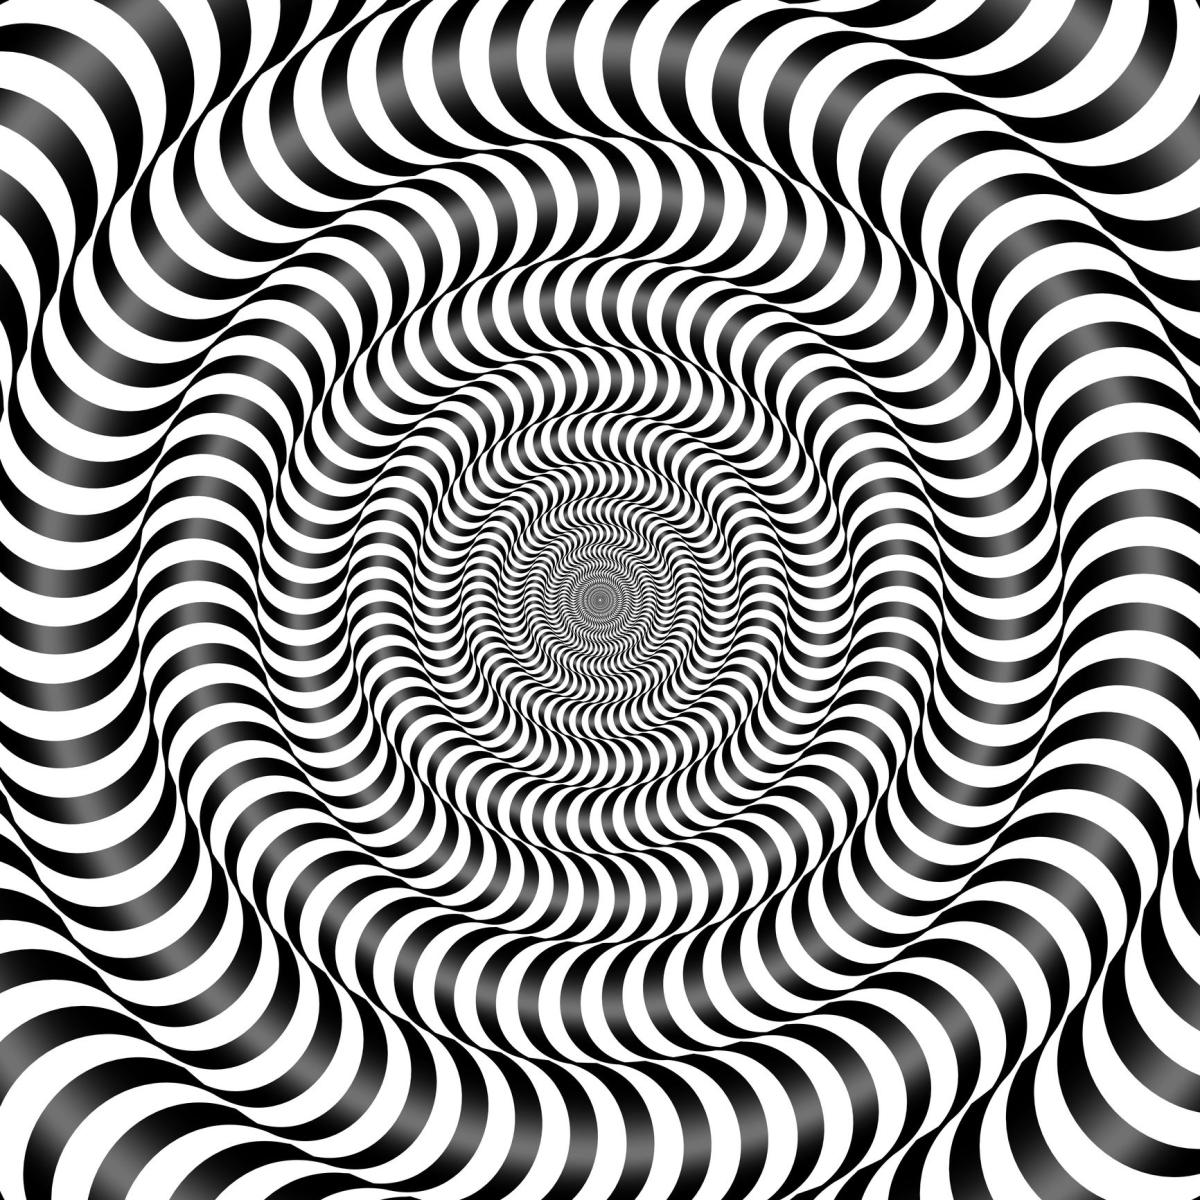 These Trippy Optical Illusions Will Mess With Your Mind - Yahoo Sports